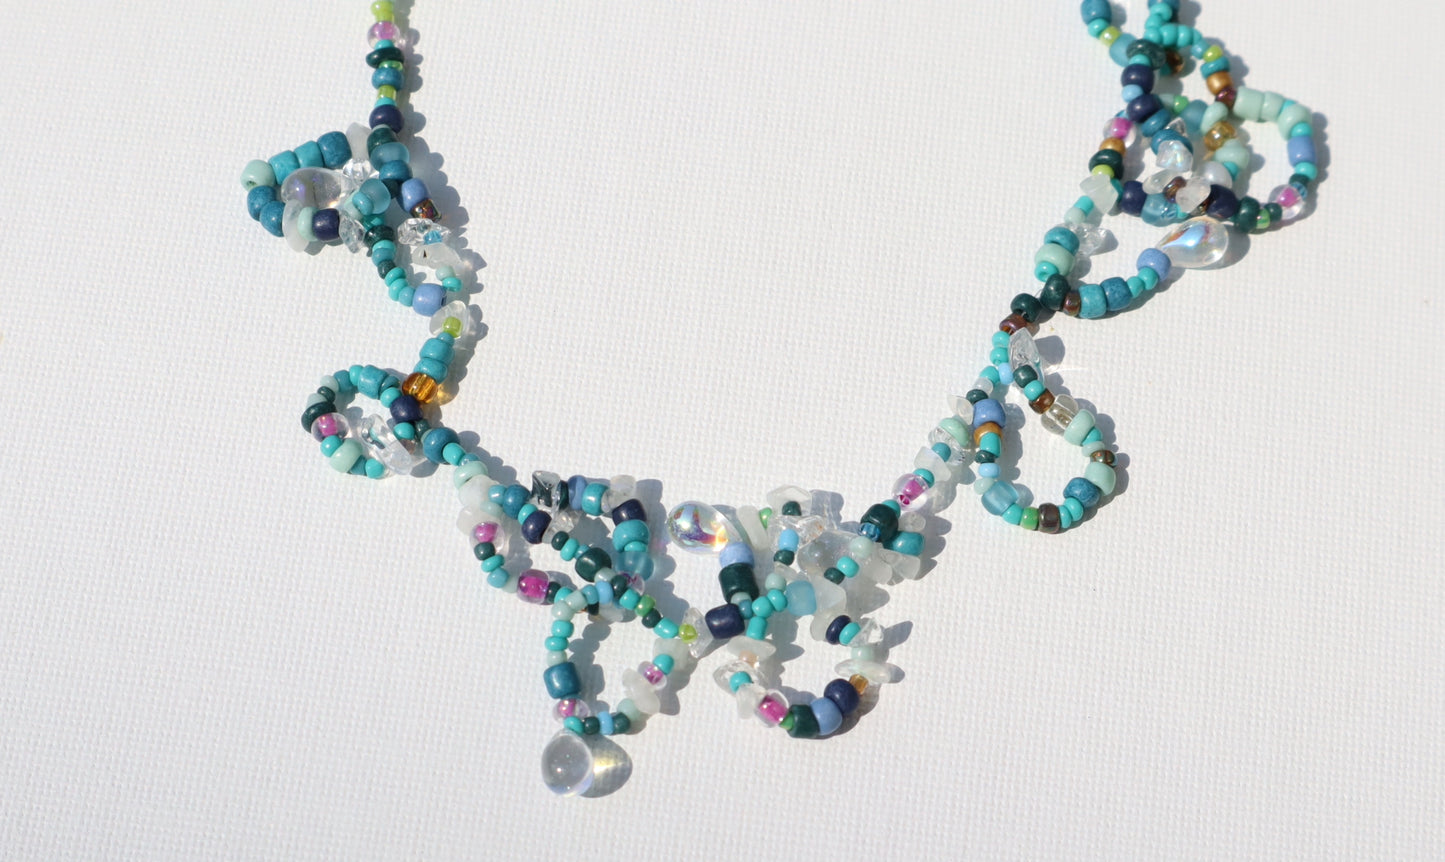 005 Turquoise Glass Beads Necklace